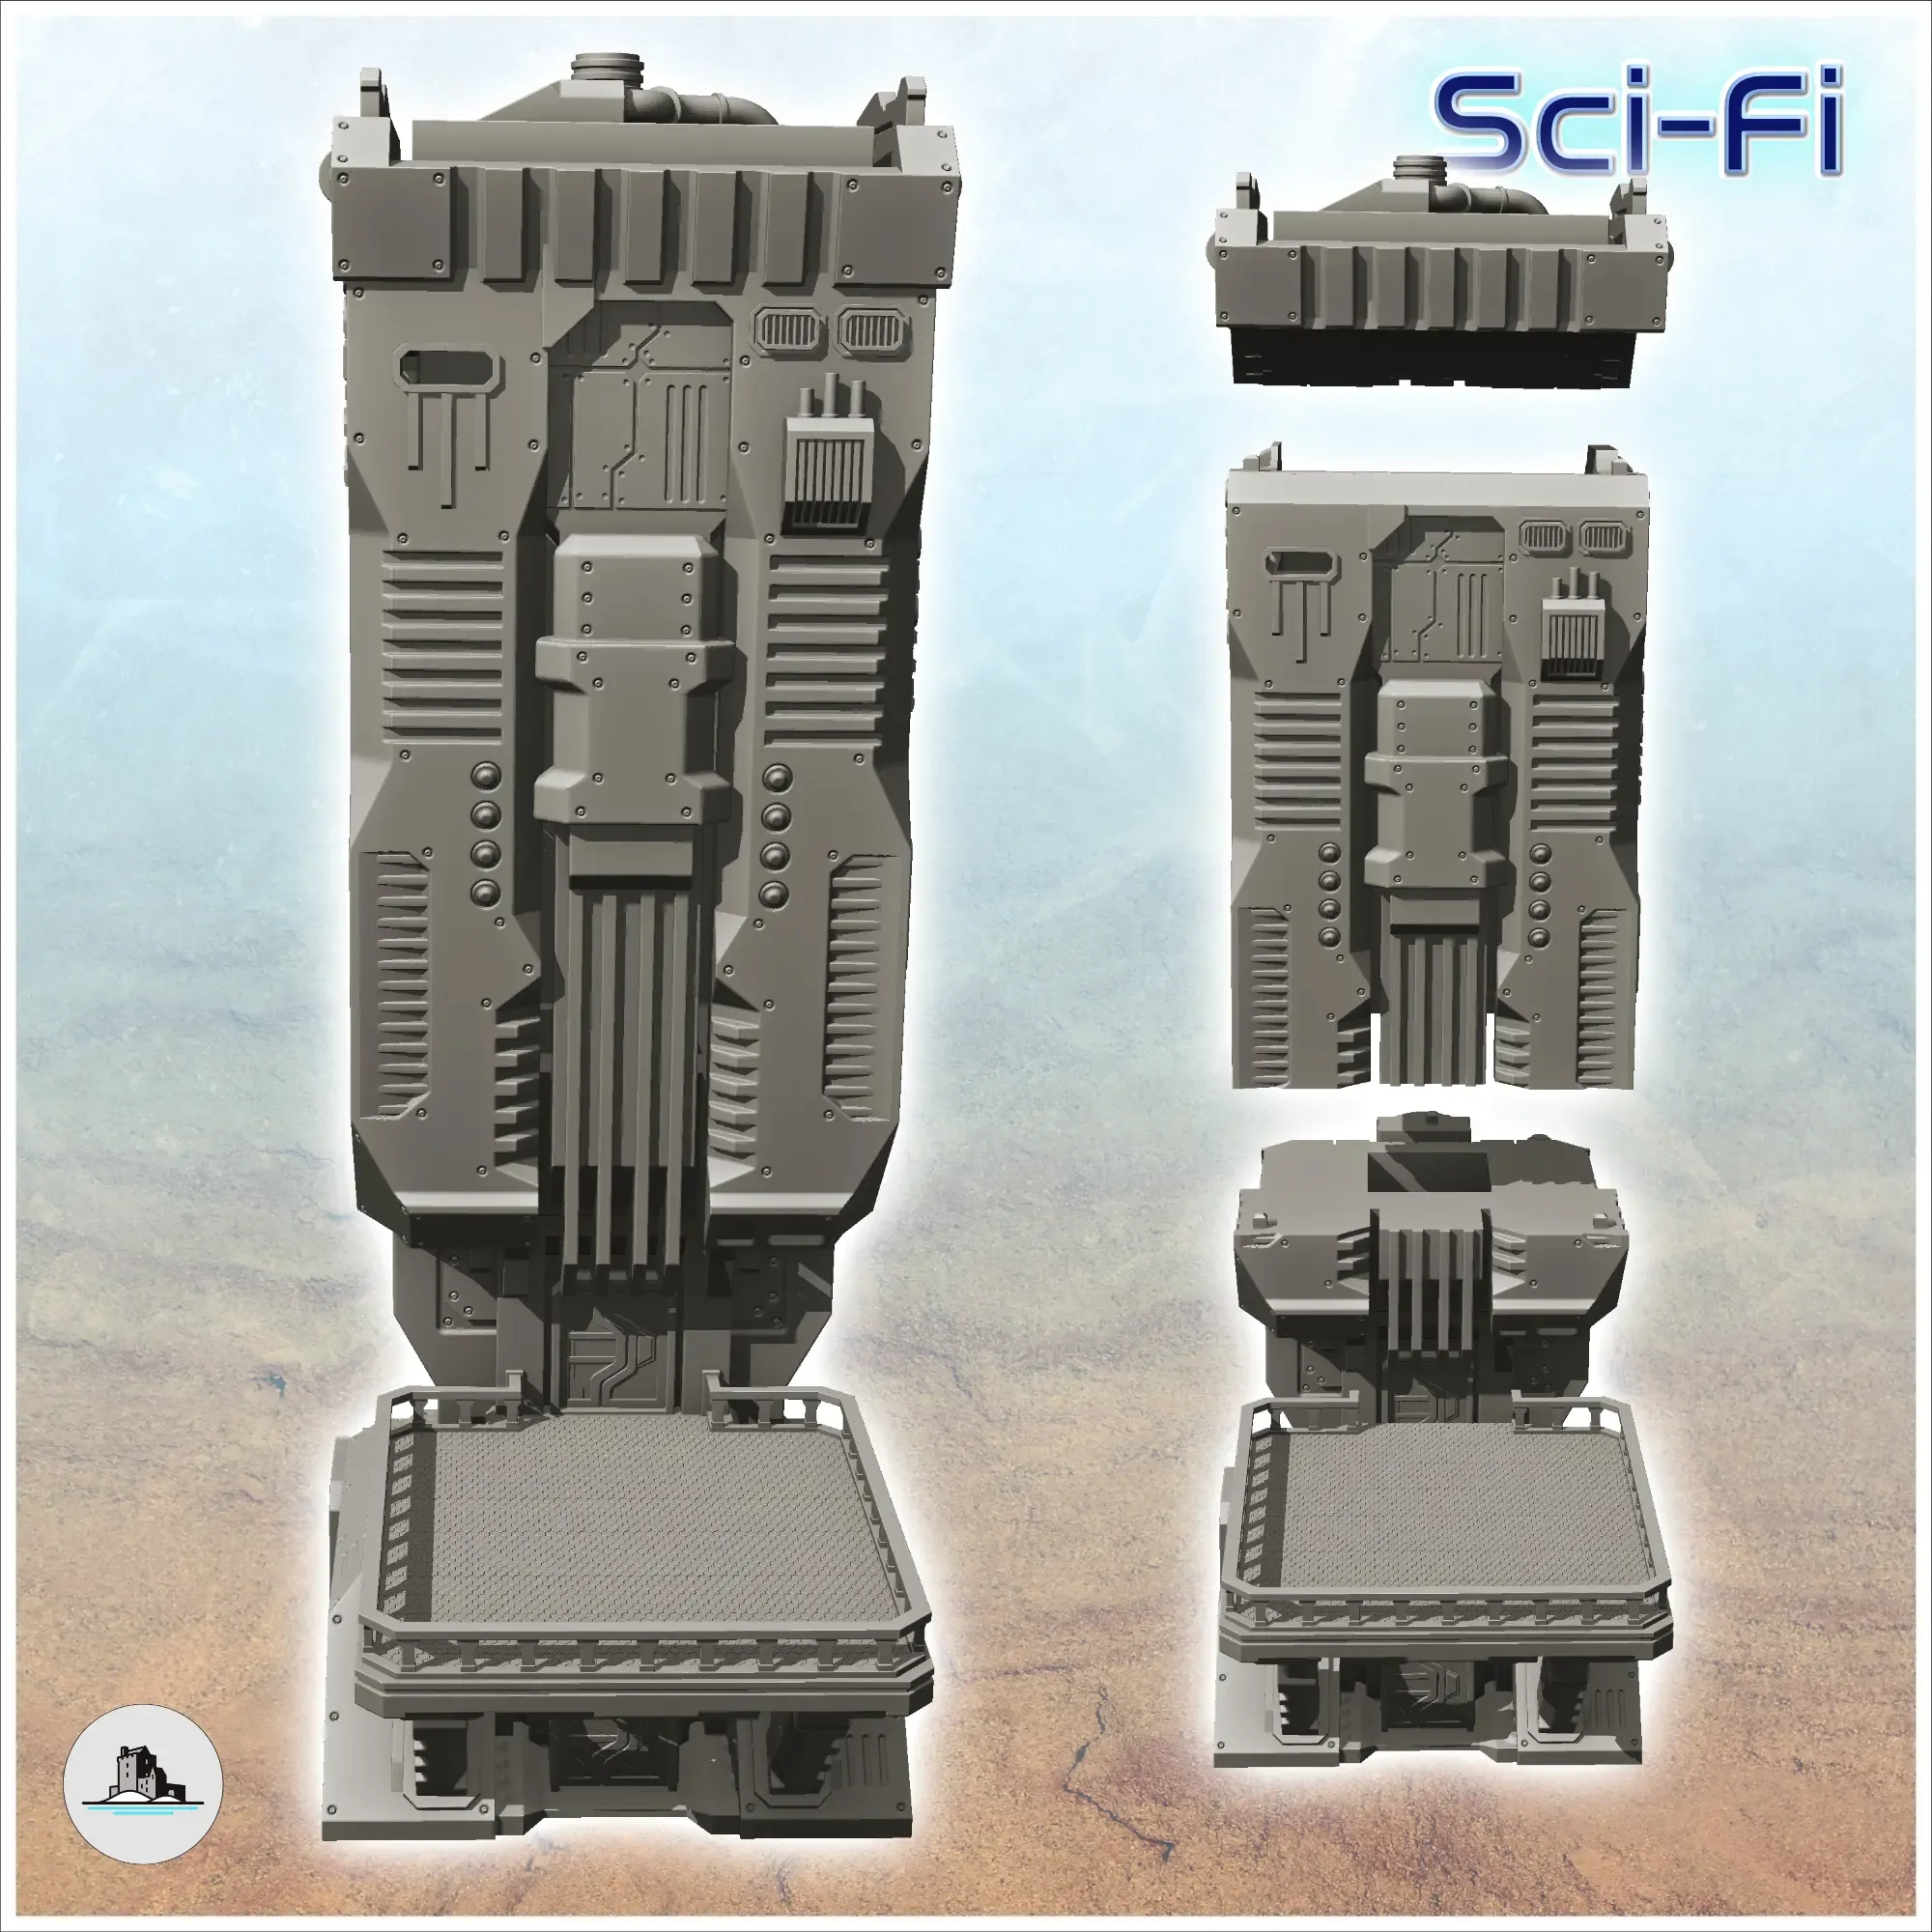 Space control tower - Terrain Scifi Science fiction SF